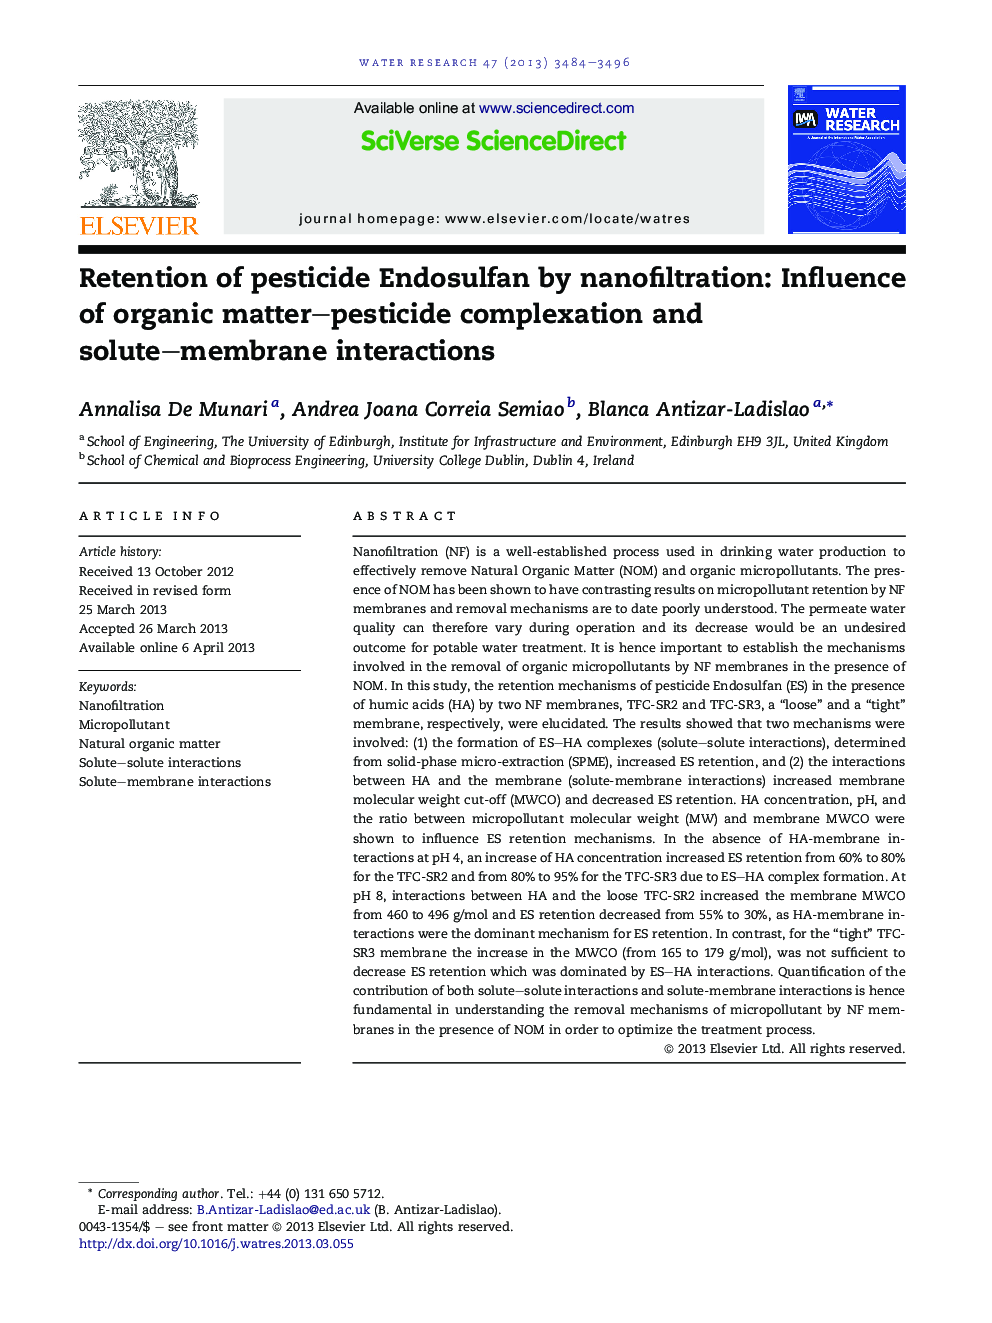 Retention of pesticide Endosulfan by nanofiltration: Influence of organic matter–pesticide complexation and solute–membrane interactions